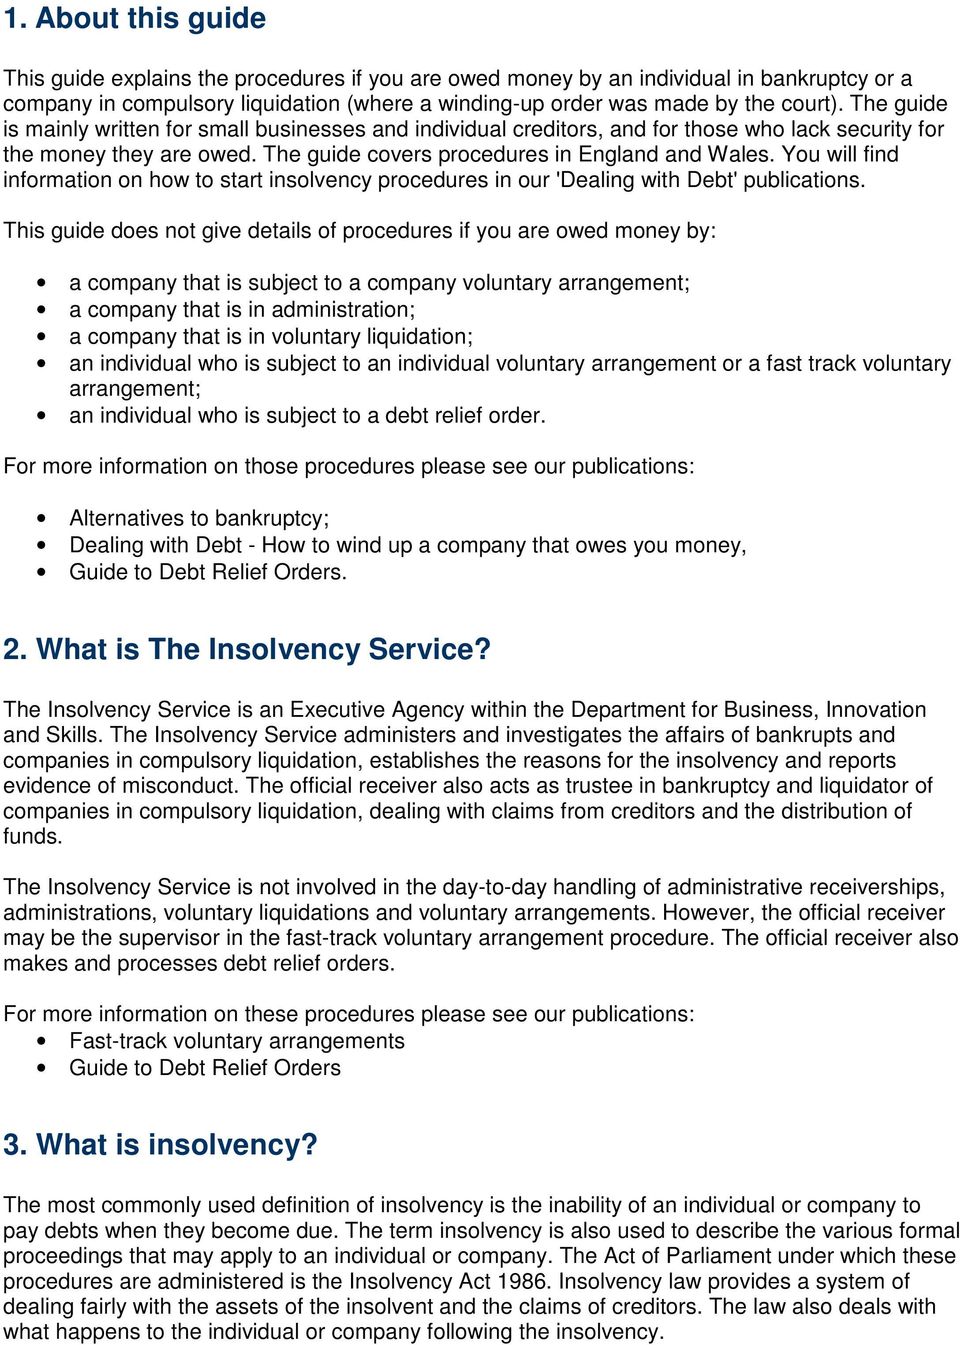 You will find information on how to start insolvency procedures in our 'Dealing with Debt' publications.